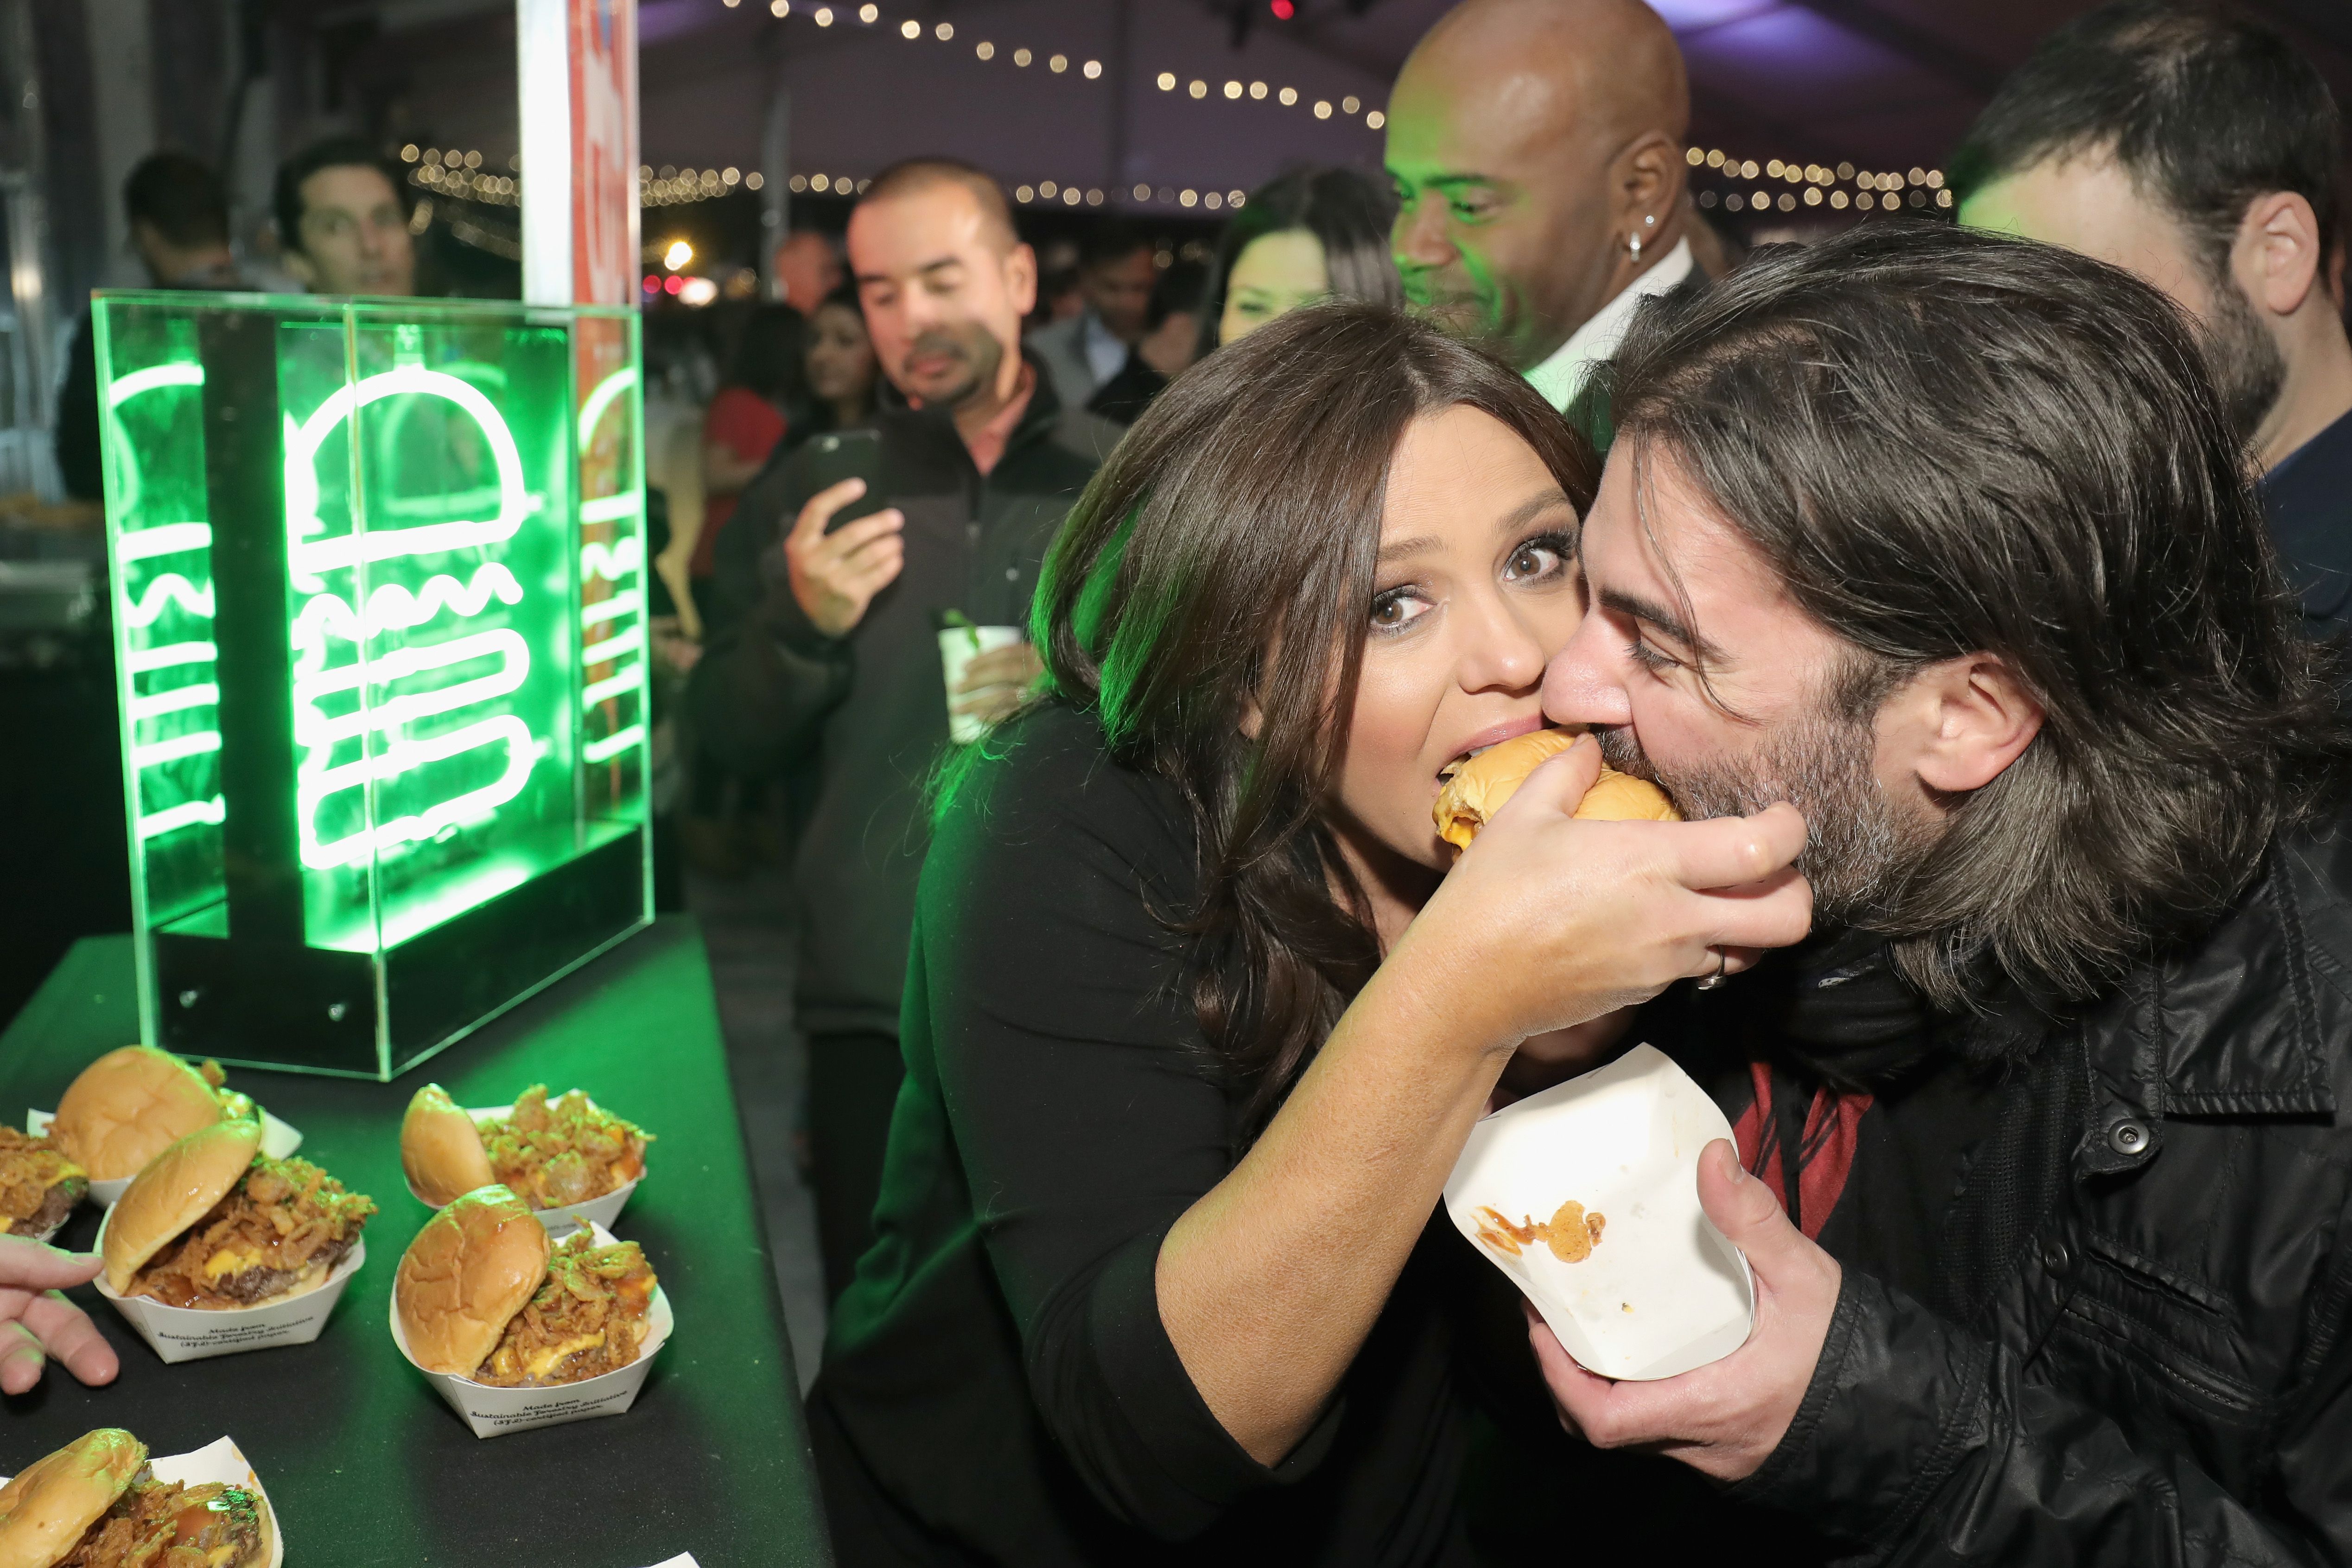 Rachael Ray and John Cusimano at the Food Network & Cooking Channel New York City Wine & Food Festival in 2016. | Photo: Getty Images